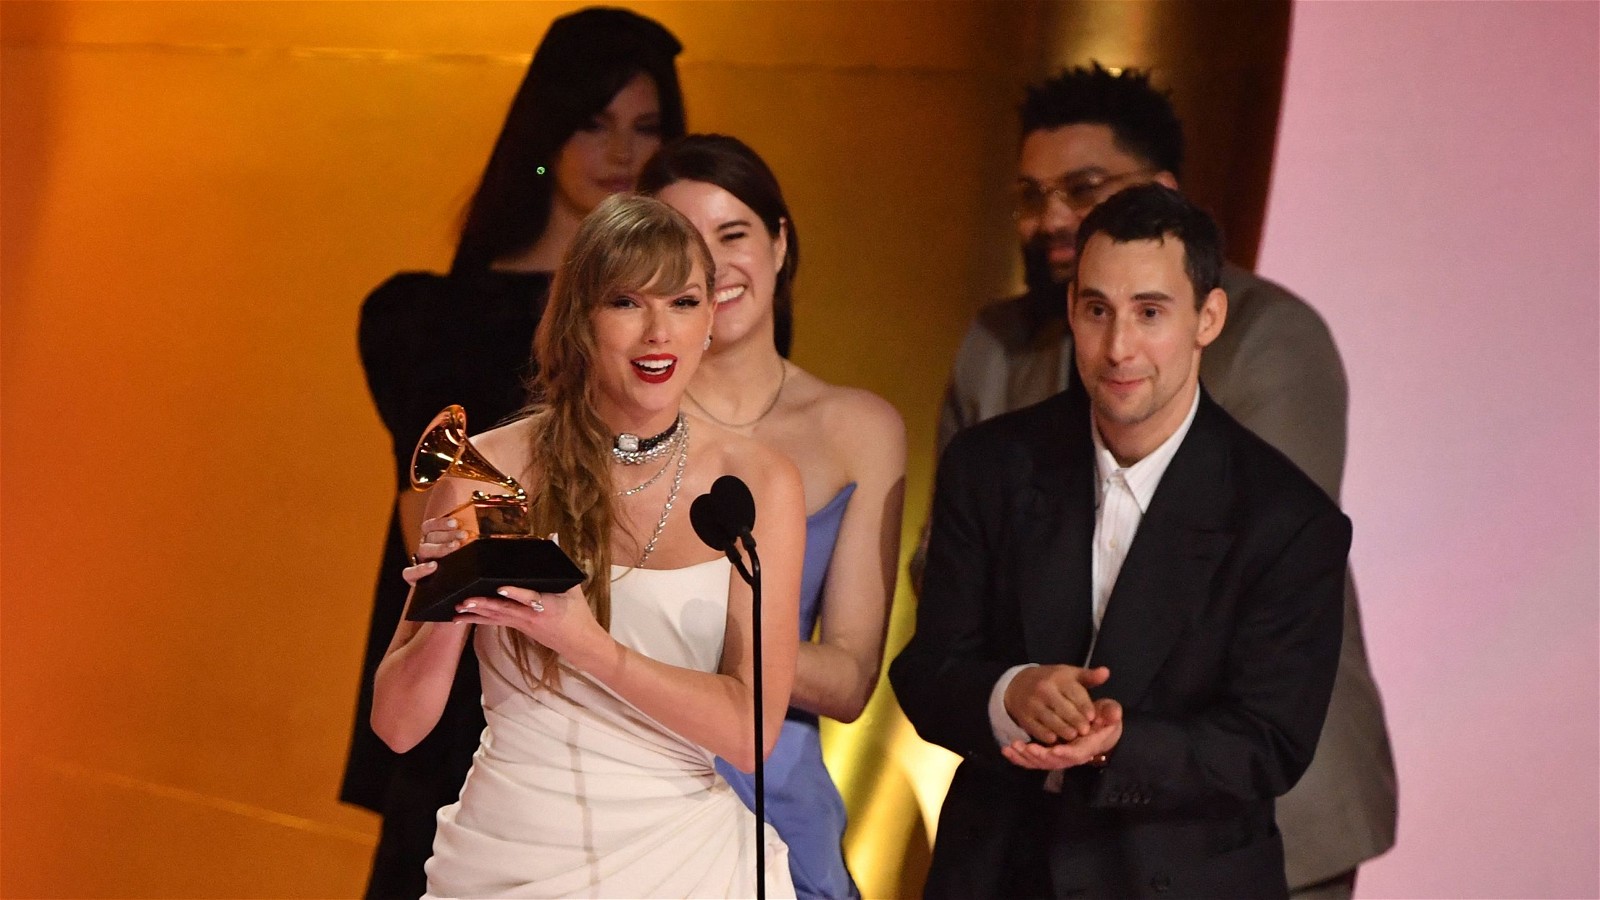 Taylor Swift accepts award for Album of the Year